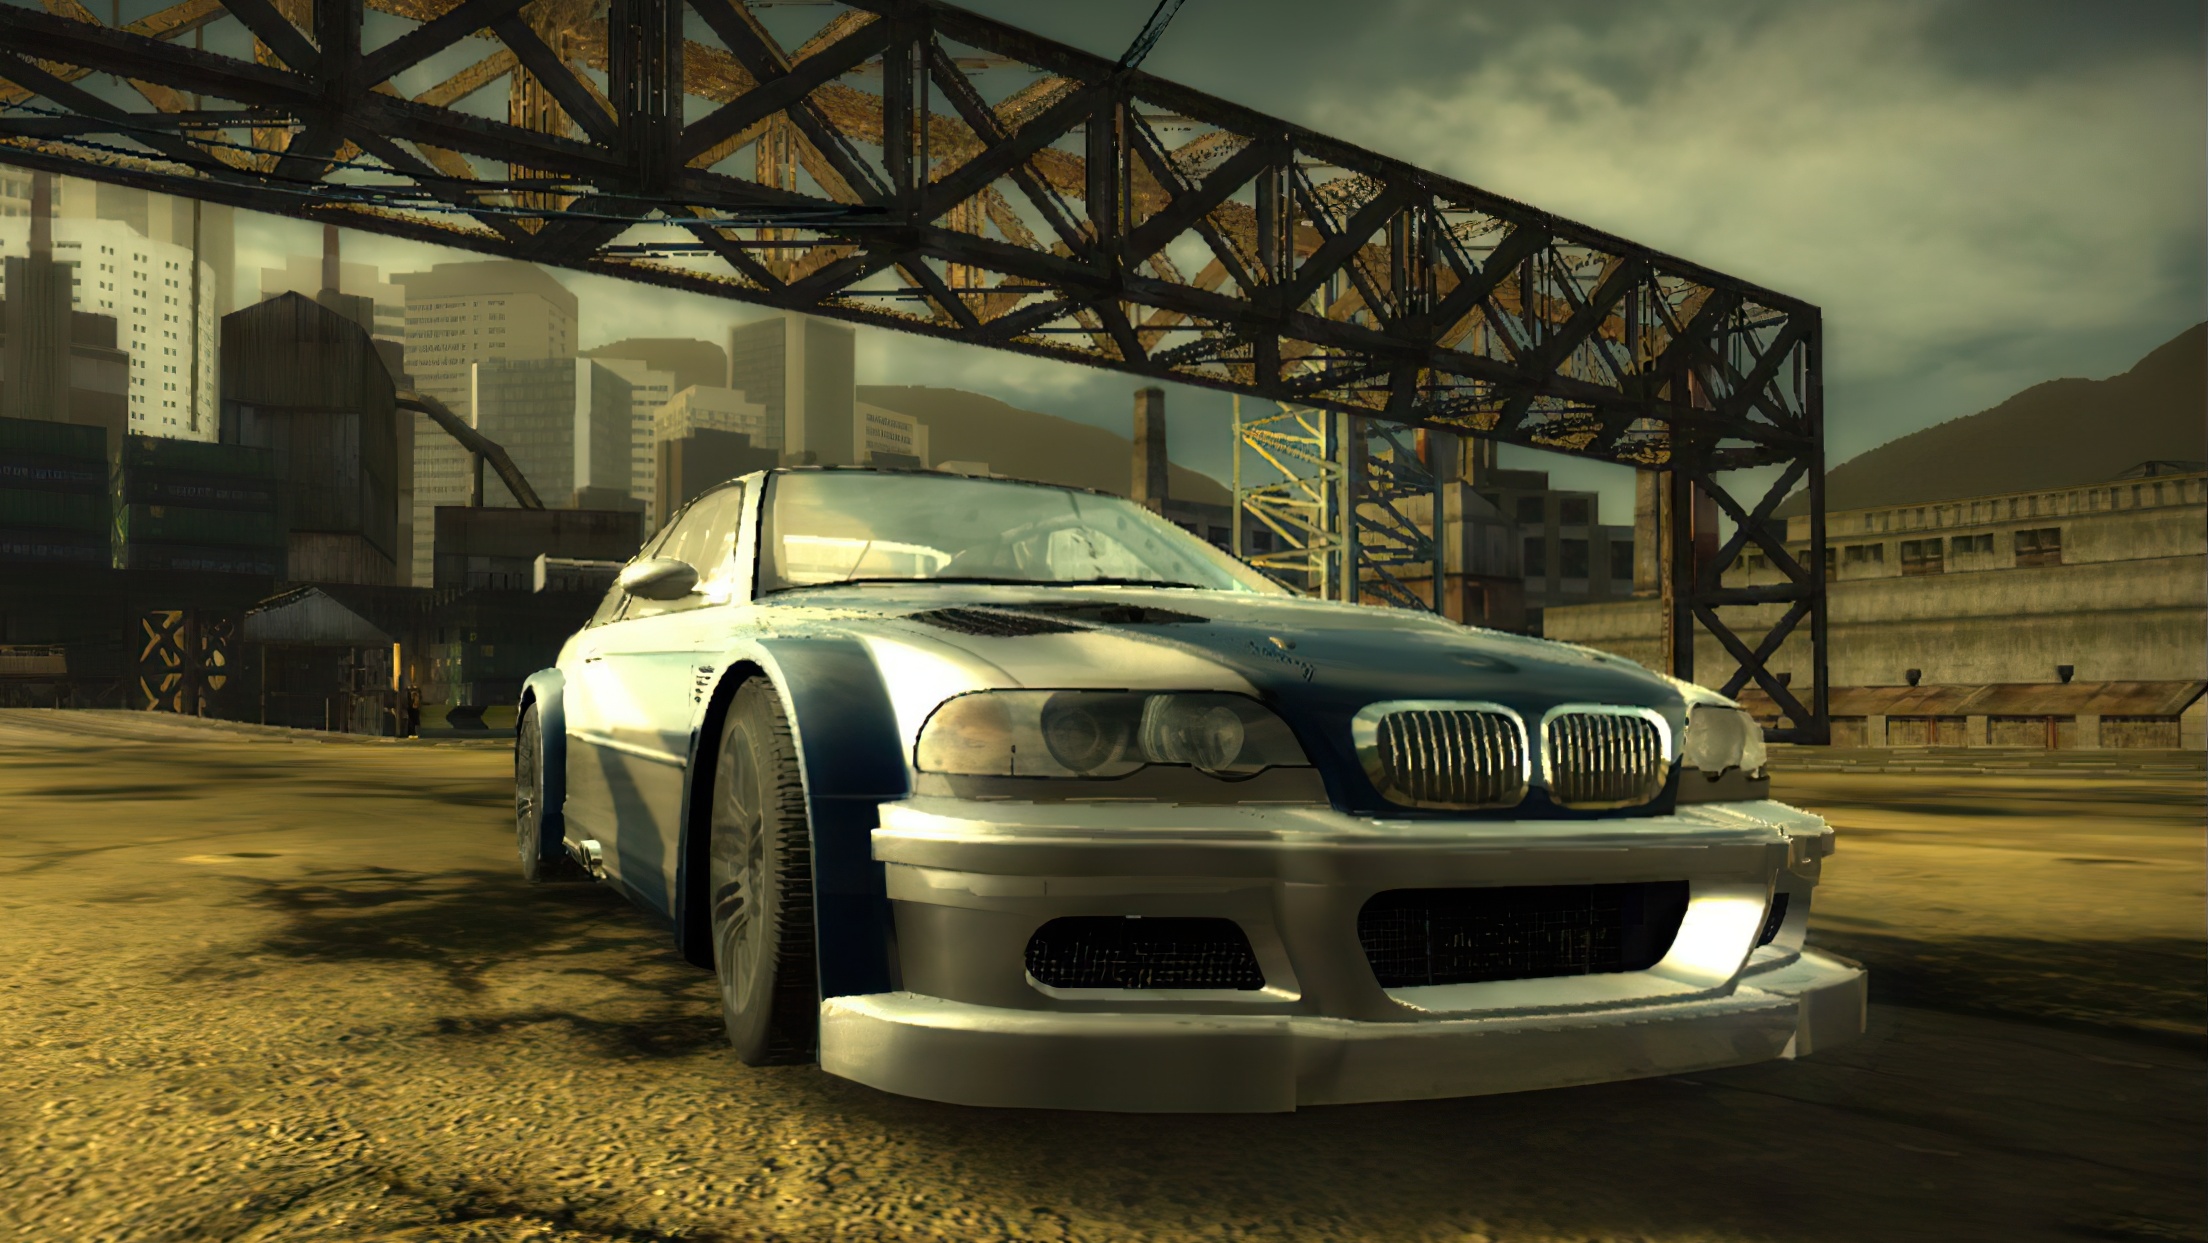 Игры nfs mw. BMW m3 GTR. Need for Speed most wanted 2005. Нид фор СПИД most wanted 2005. Нфс МВ 2005.